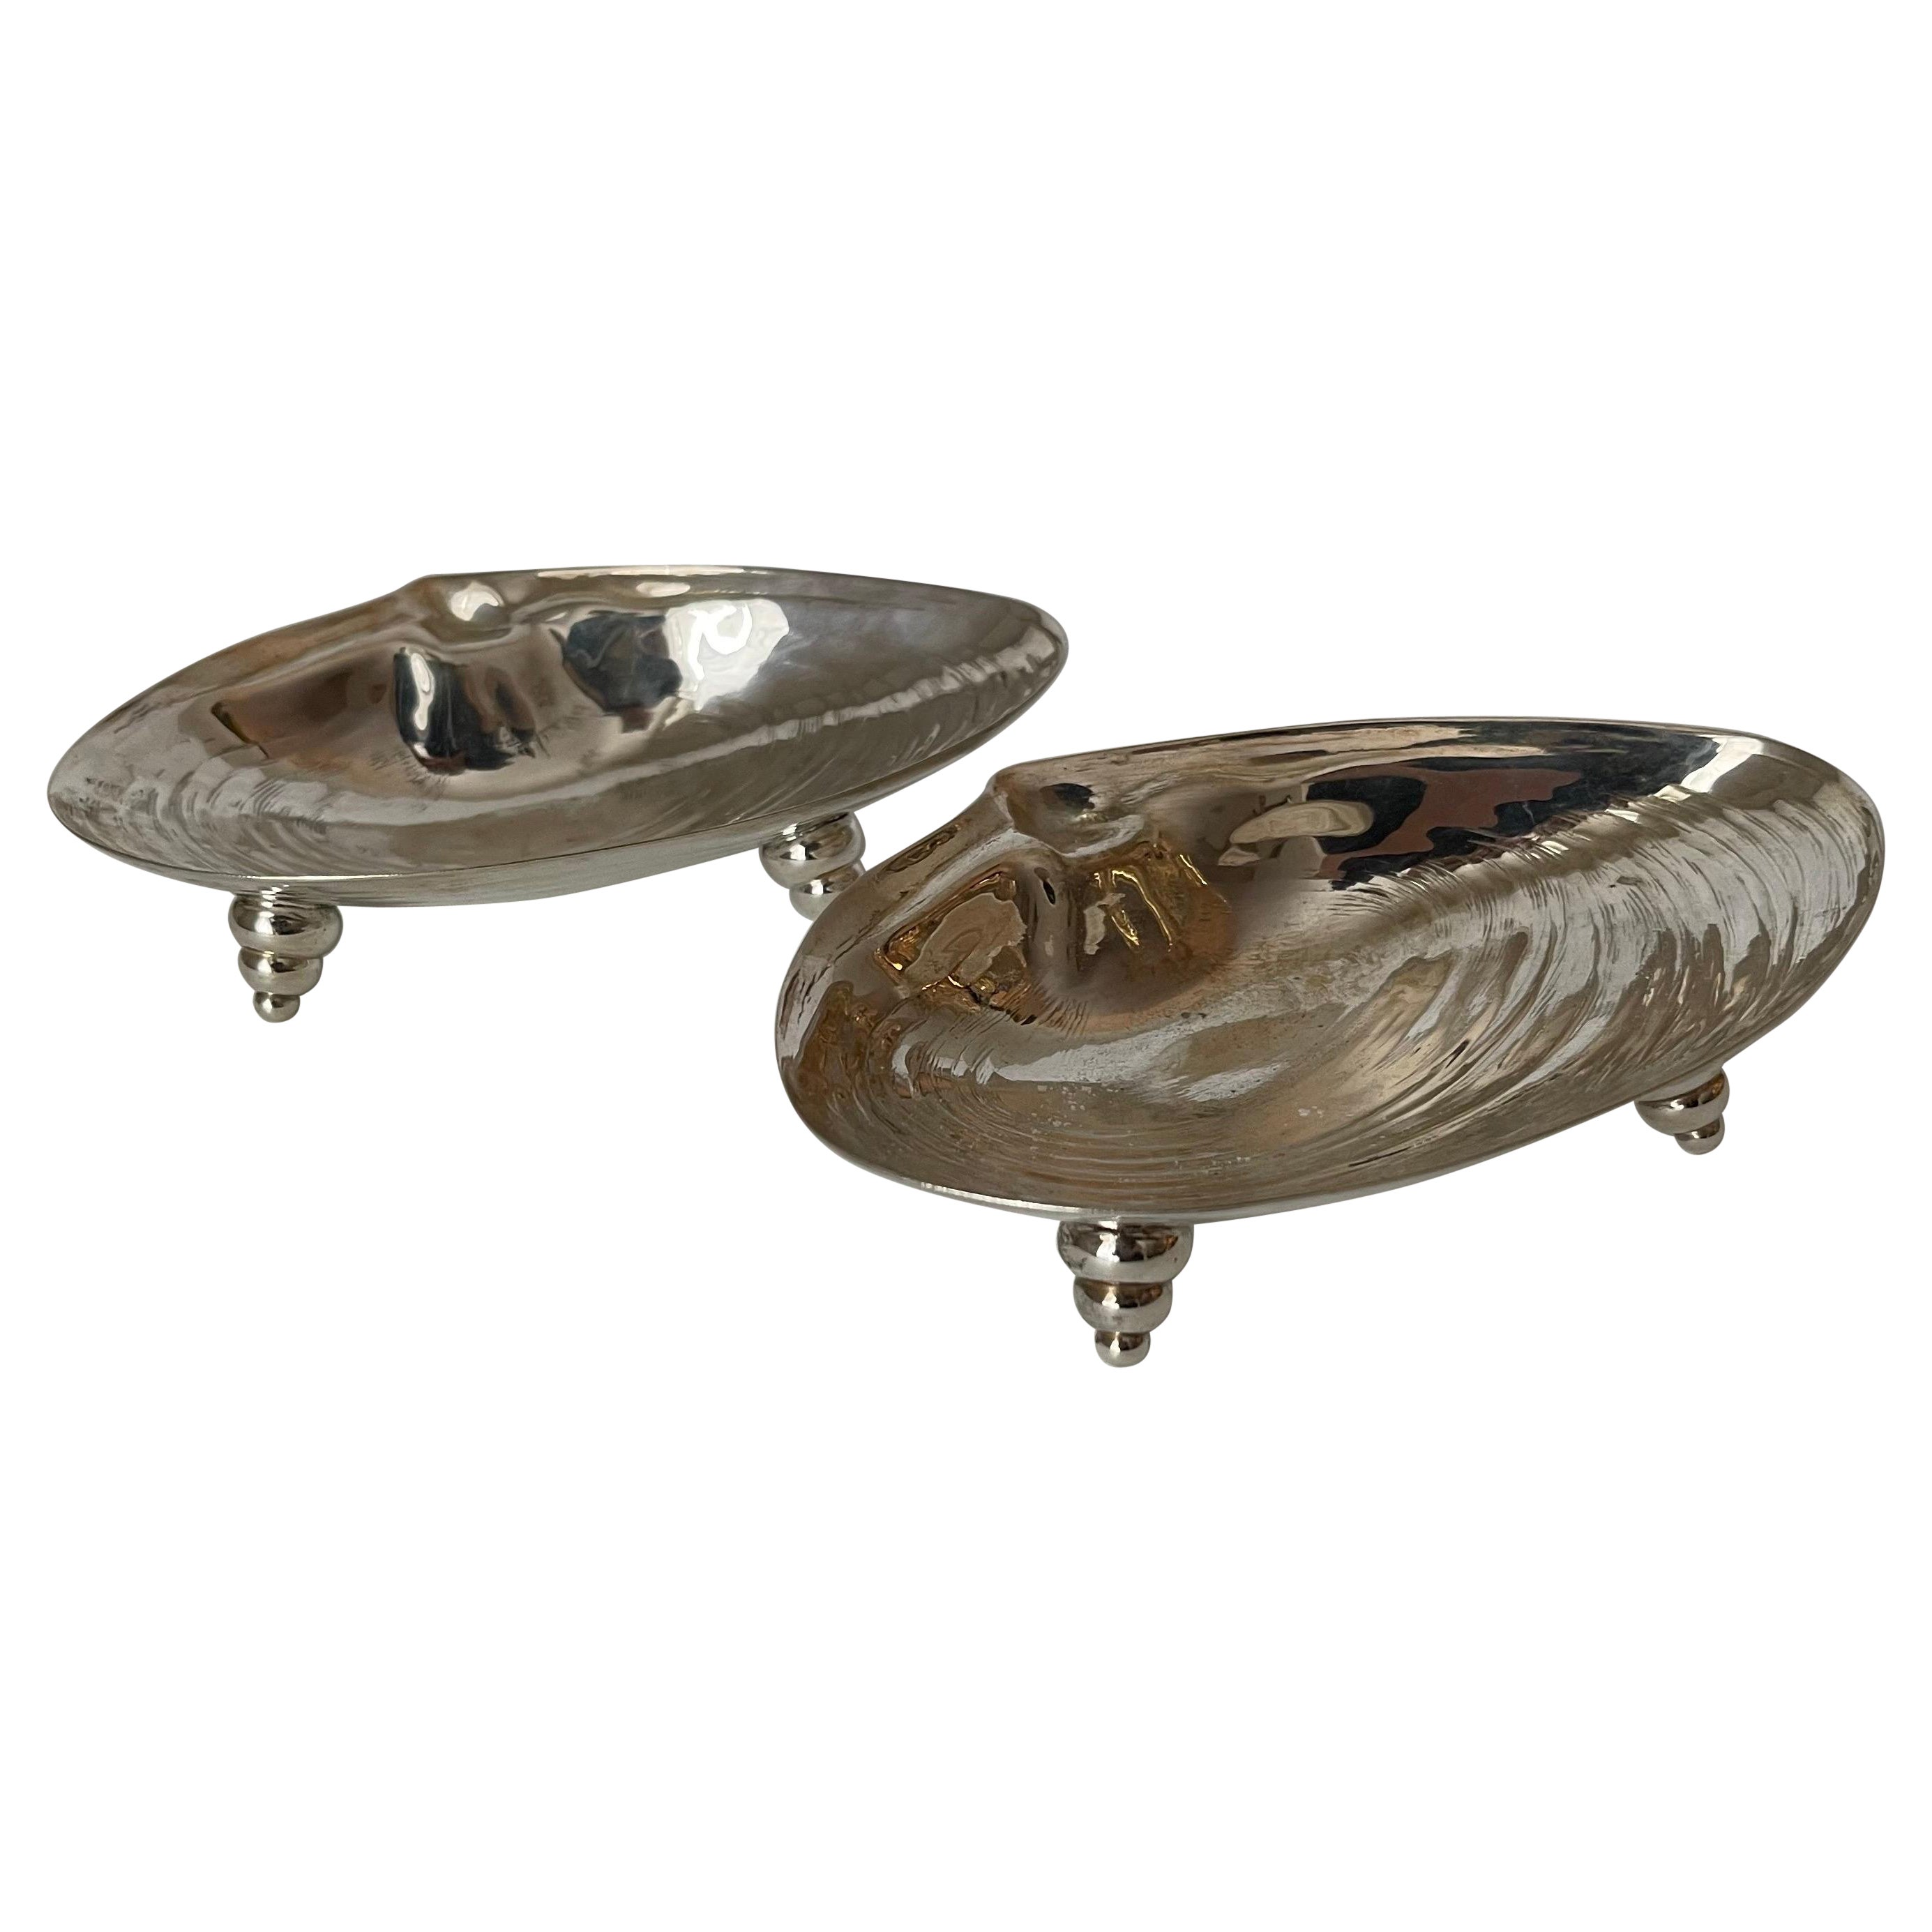 Silver Plated Shell Form Candy Dishes or Ashtrays, Pair For Sale